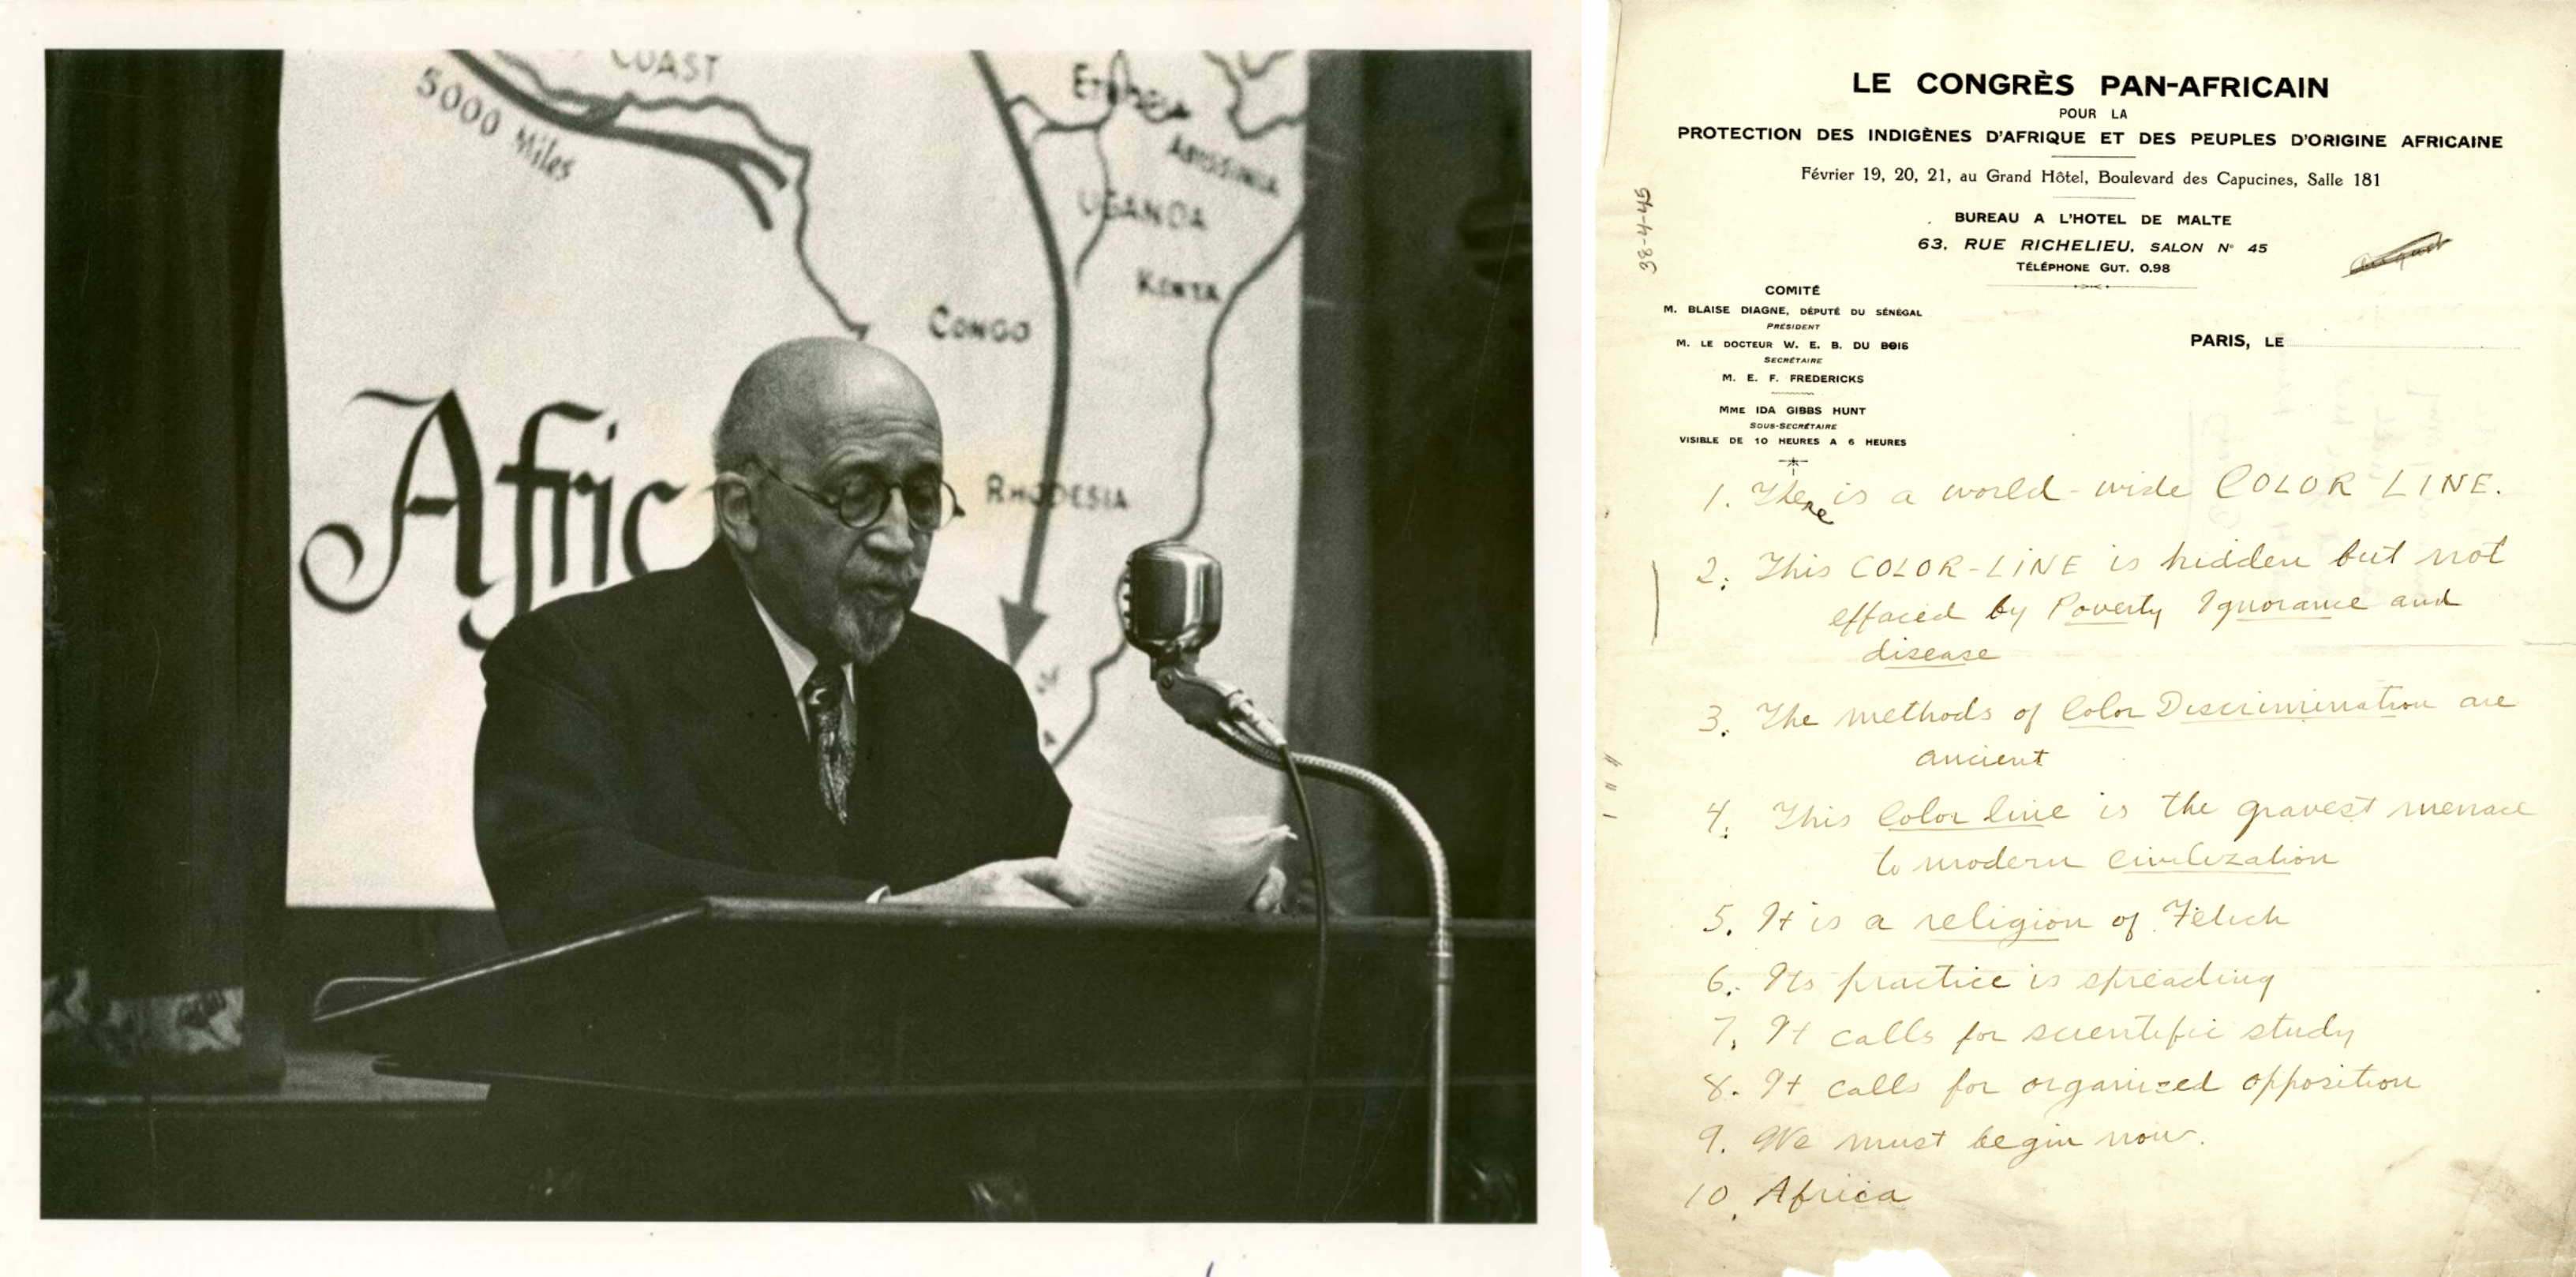 On the left, Du Bois lecturing on Africa. On the right, a handwritten outline of his talk delivered at the Pan African Congress.